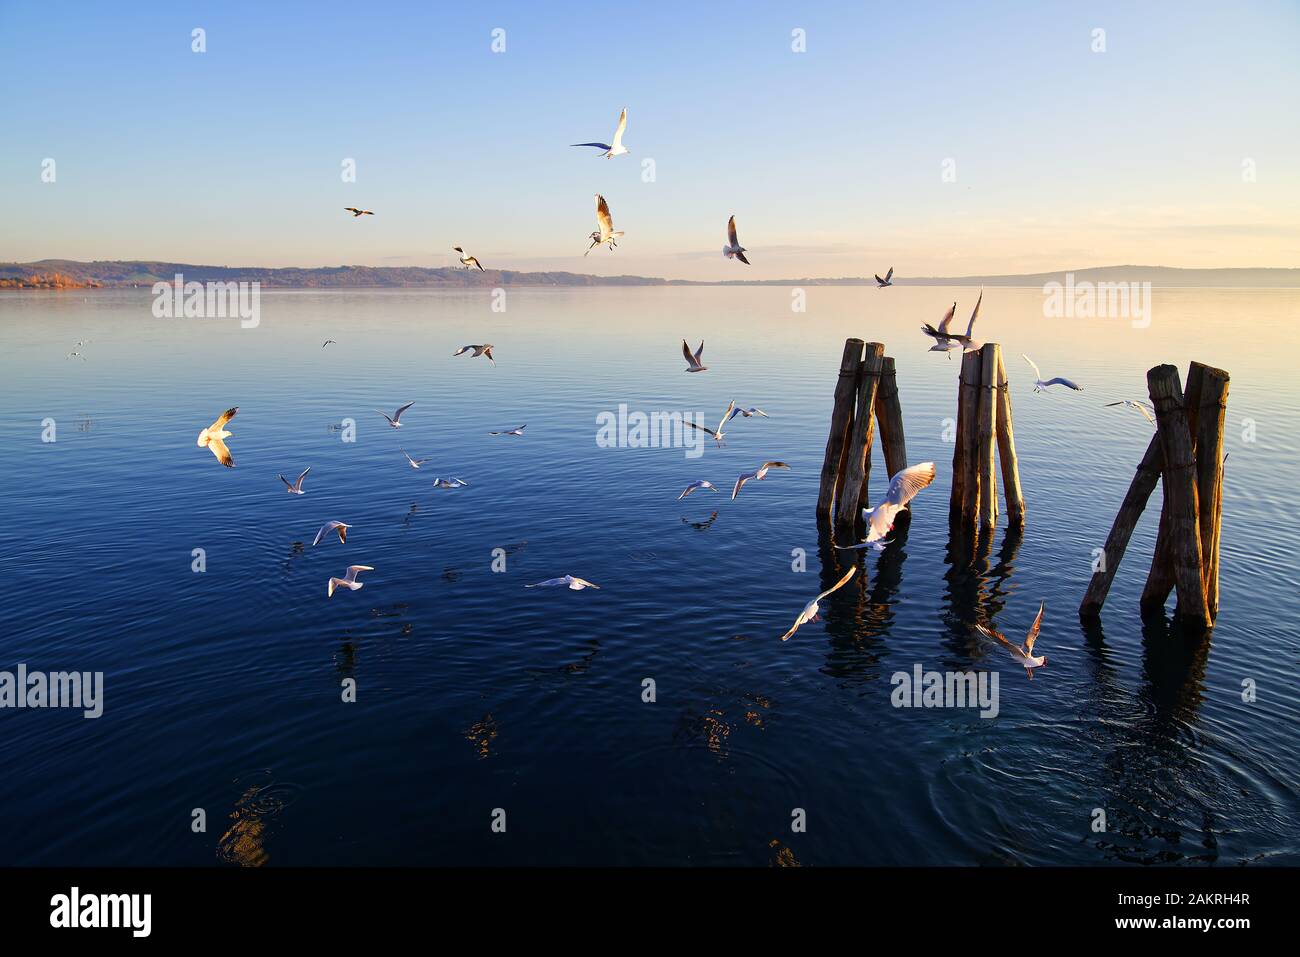 Peaceful landscape with lake at dusk, birds, deep blue water Stock Photo